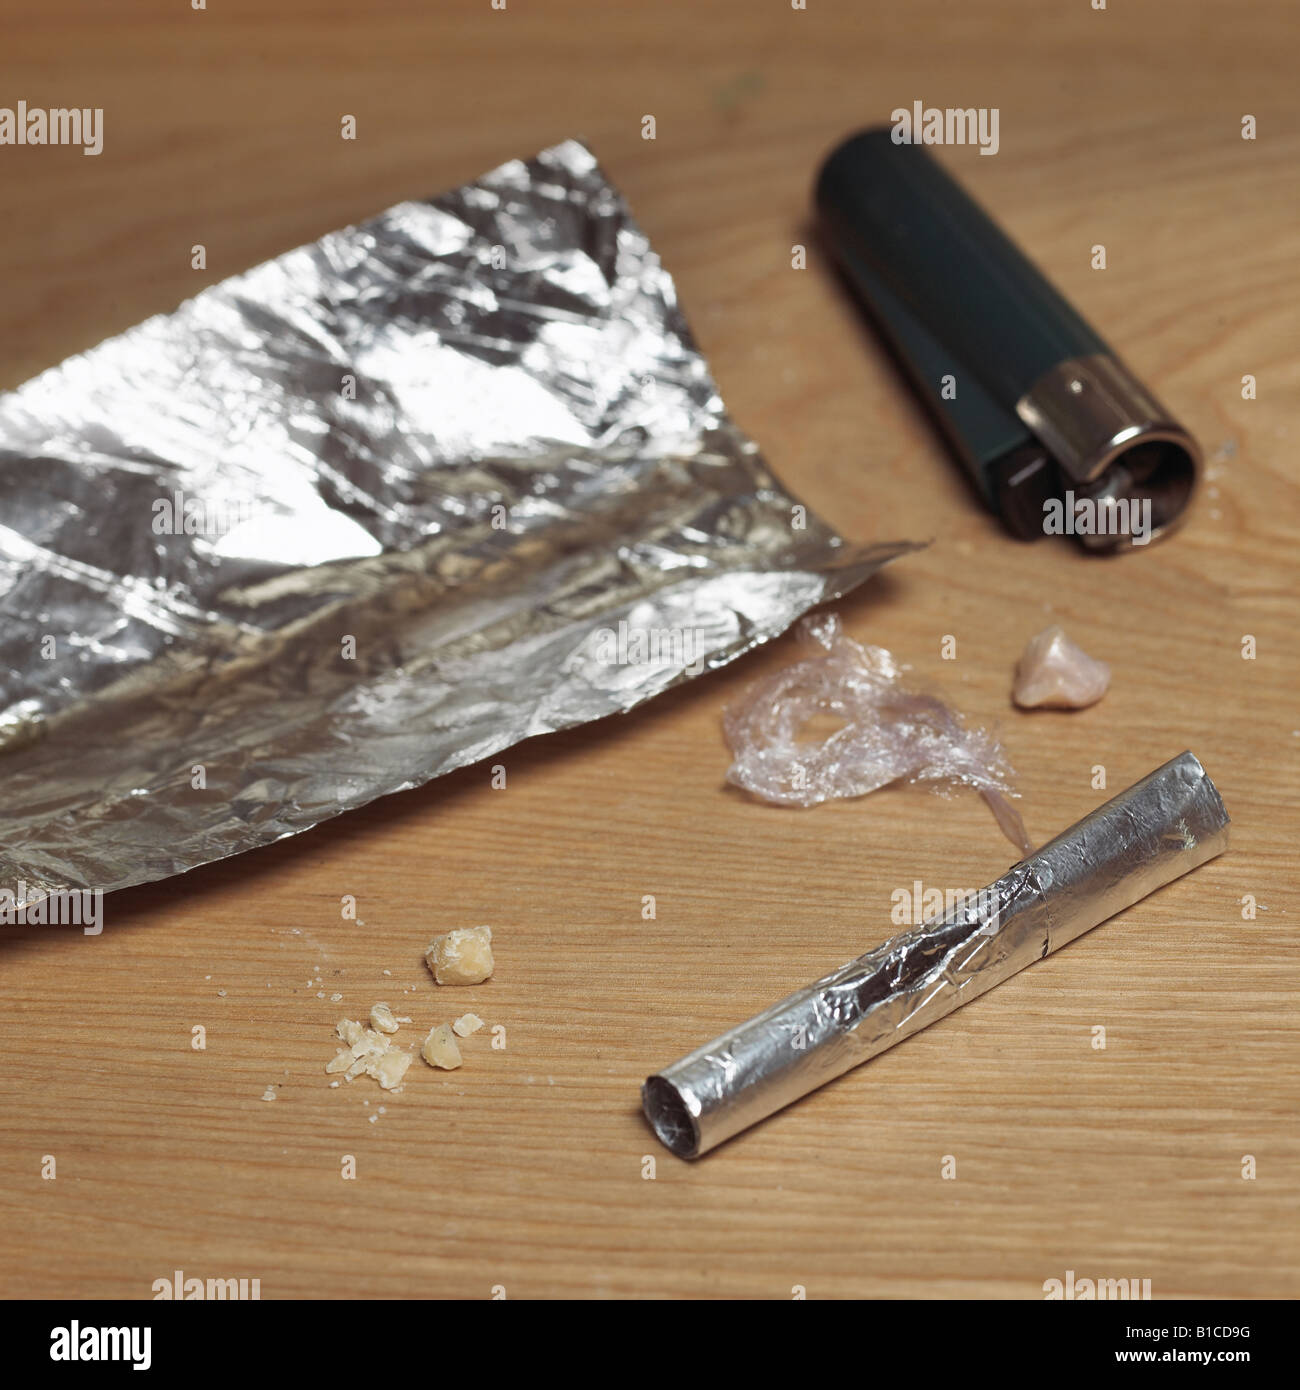 How To Smoke Crack With Tin Foil